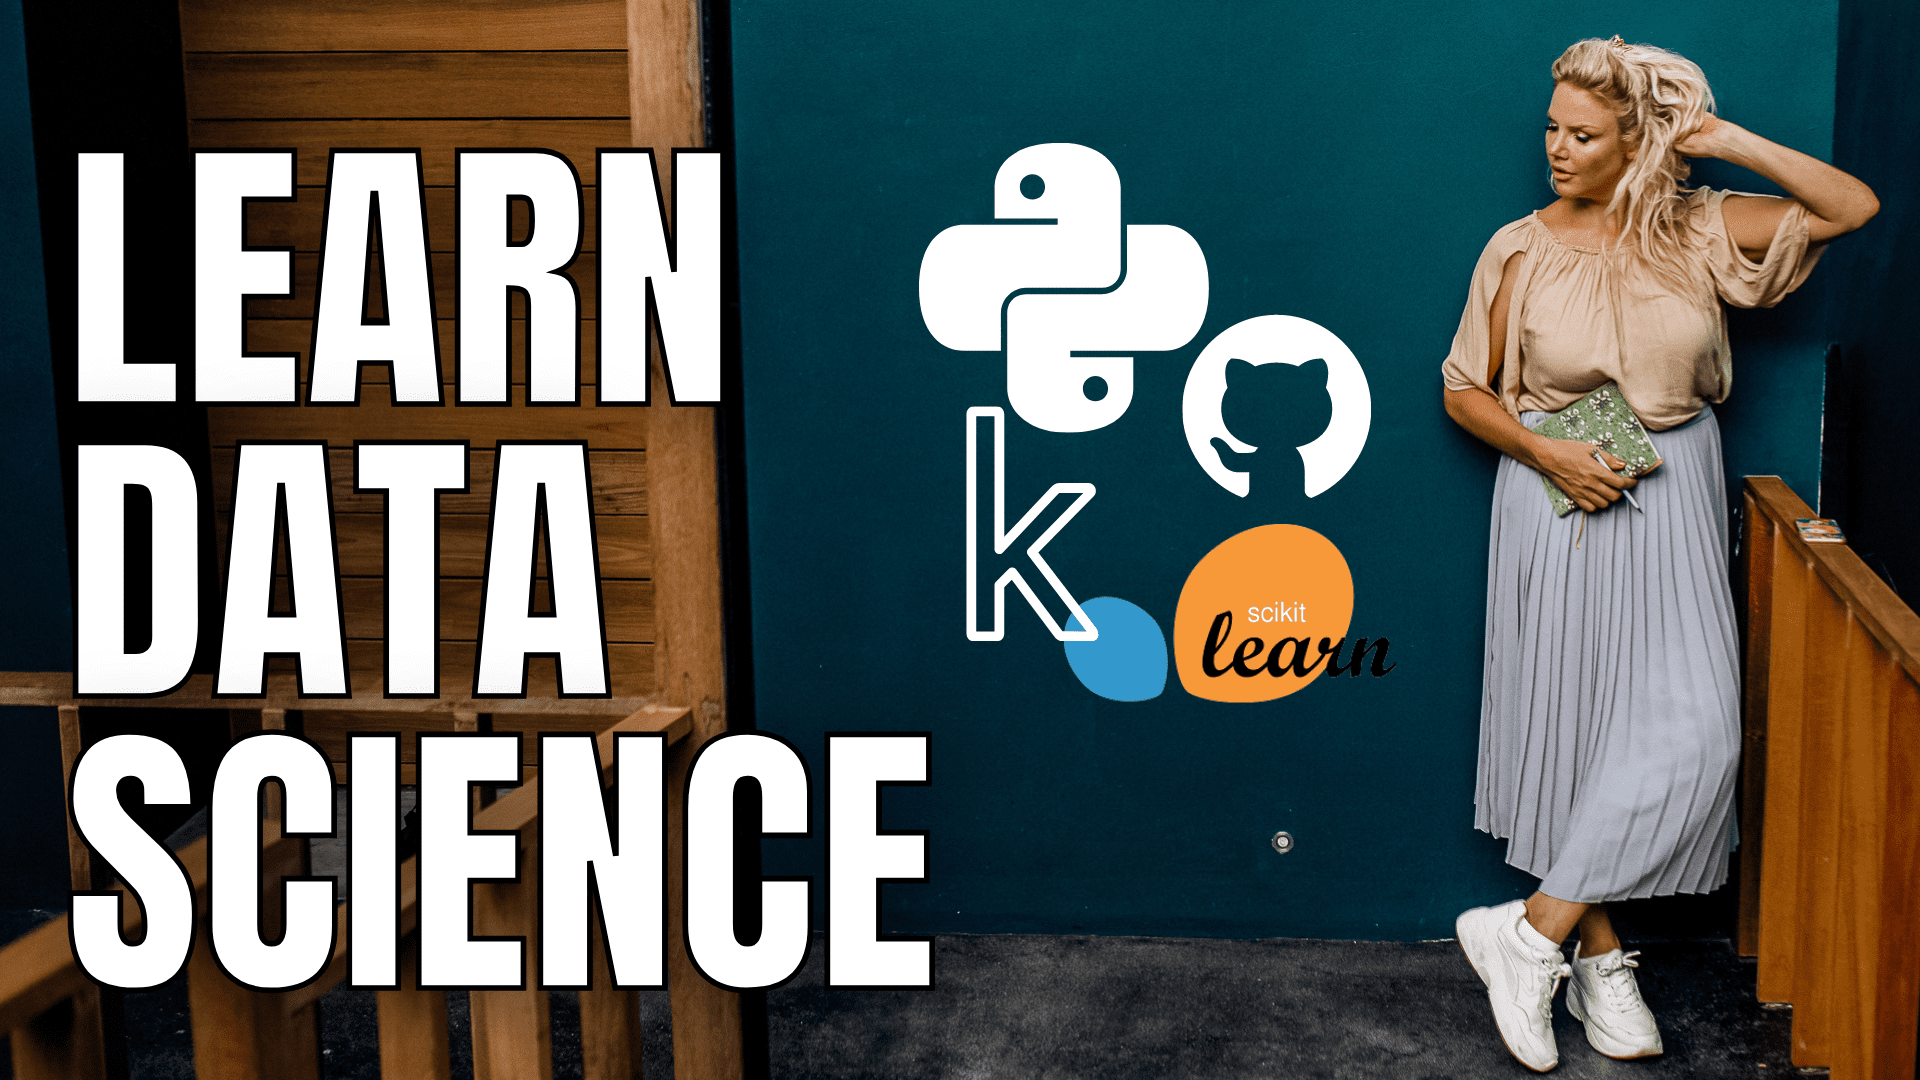 Learning Python for Data Science can be not that hard if you follow these easy tips